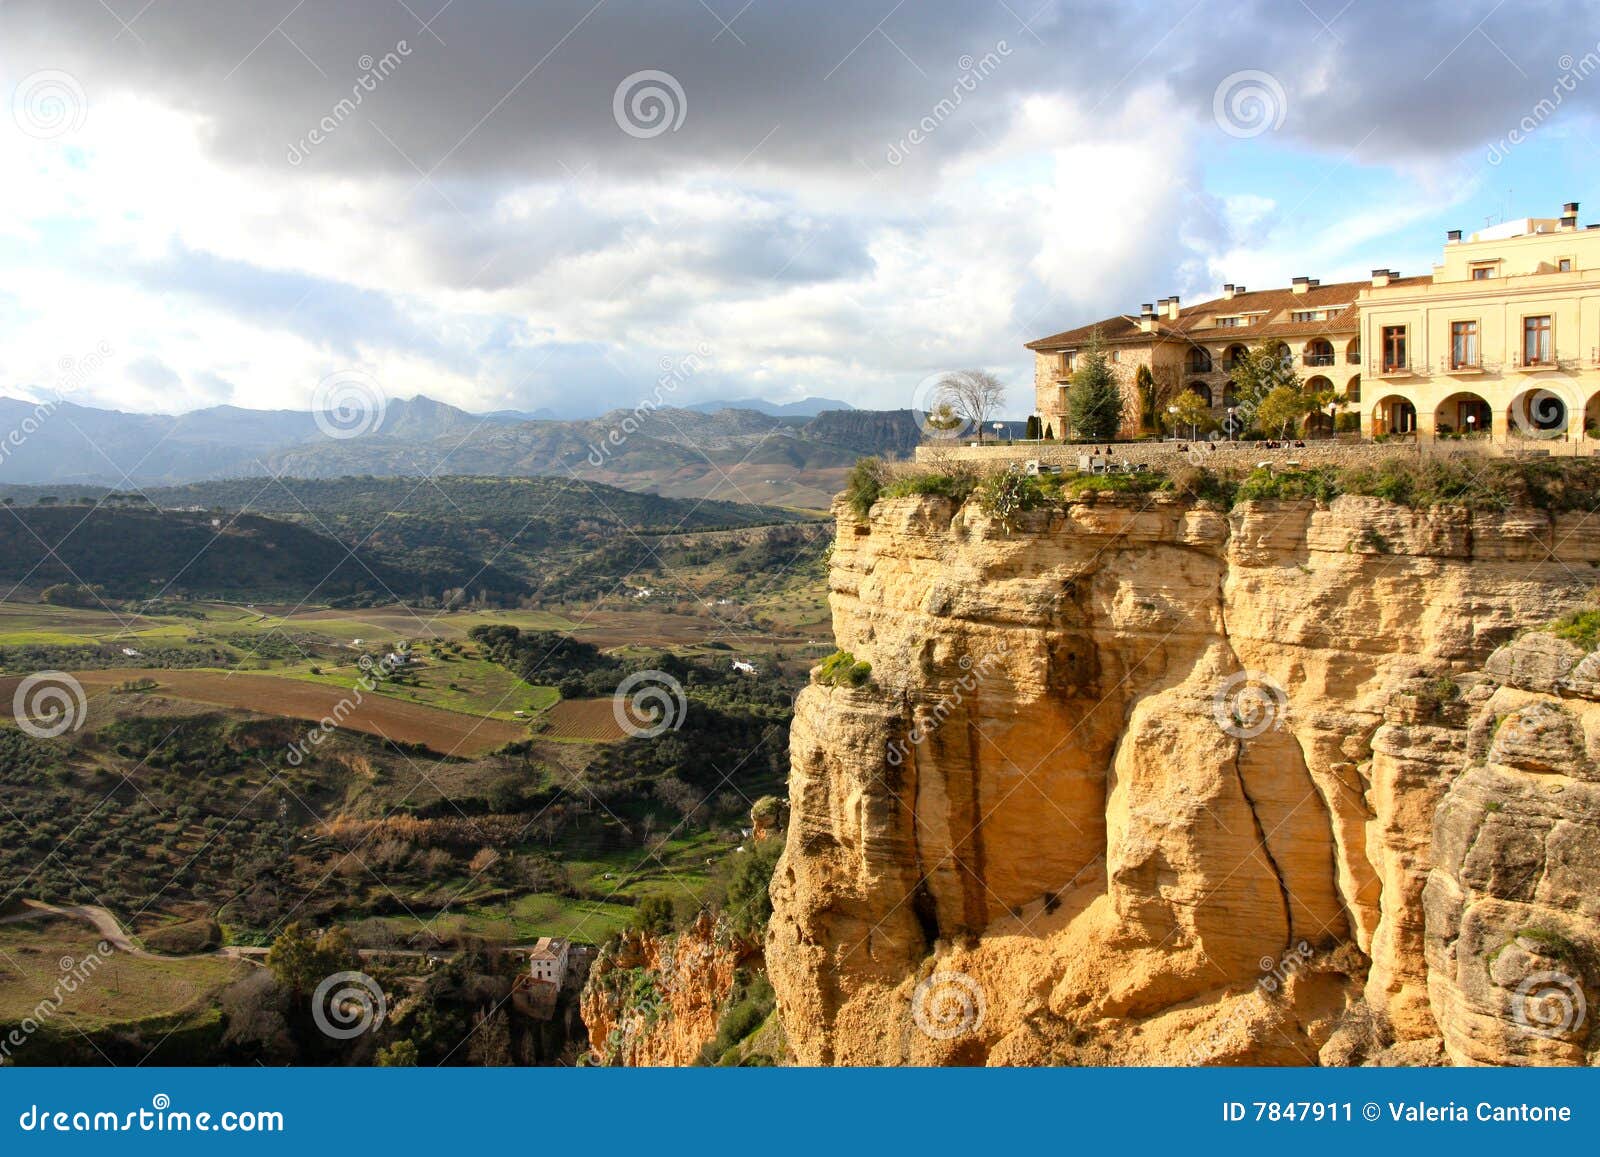 ronda village in andalusia, spain